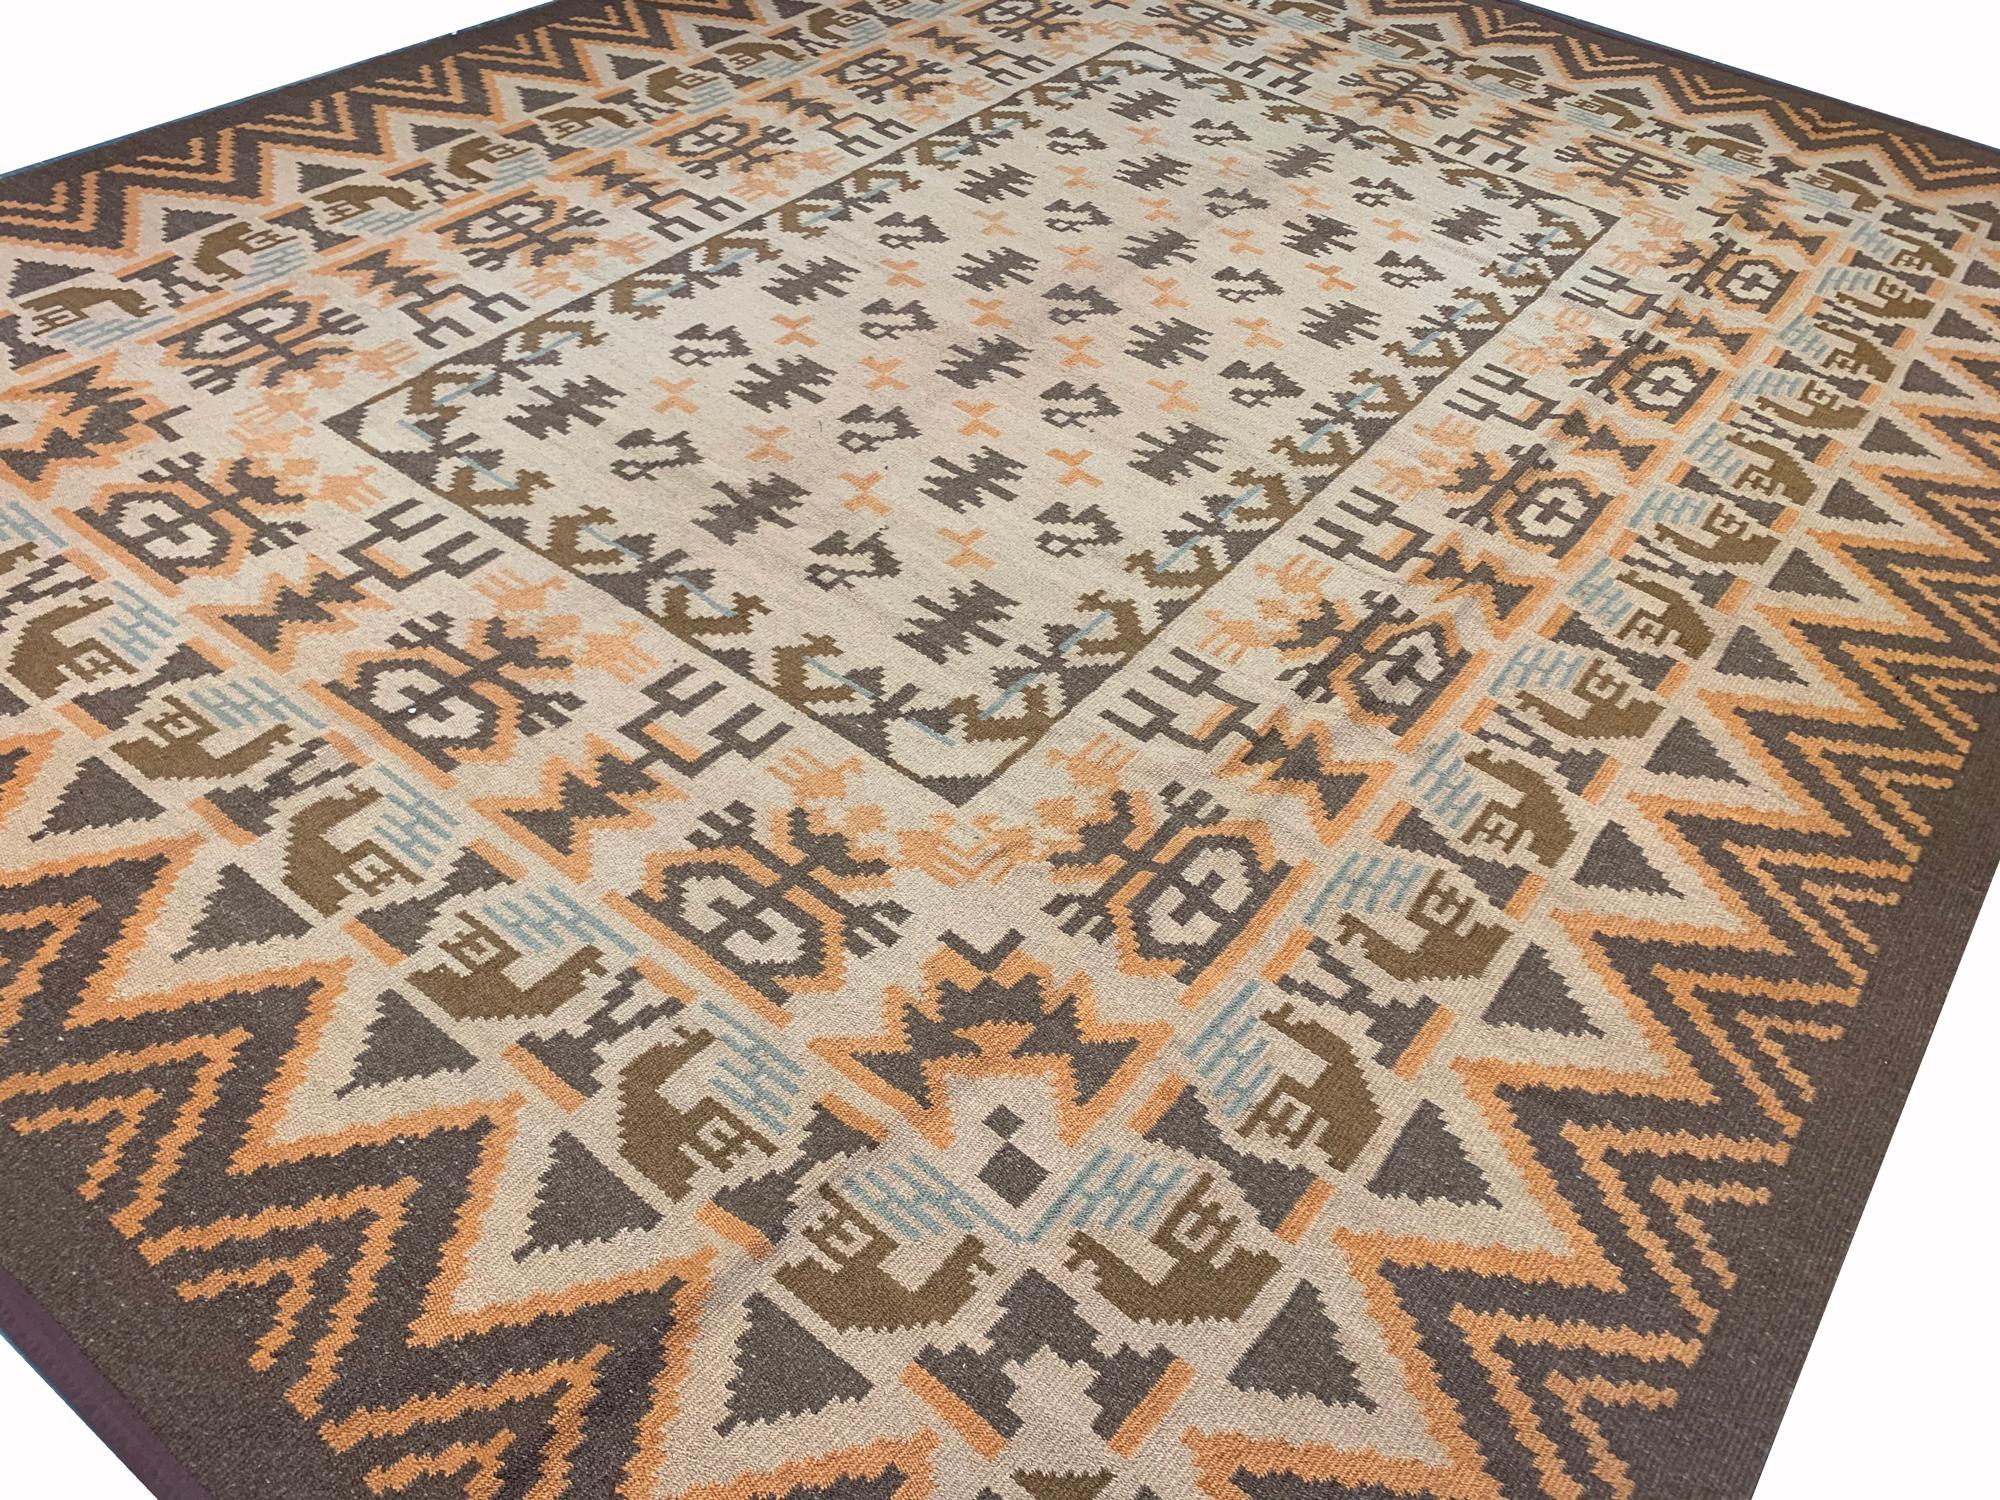 This Scandinavian style Kilim rug was woven by hand in Sweden in the 1930s. Woven with a bold geometric design with accents of beige, cream light blue and orange, this is then framed by a zig-zag border woven in brown and orange. This oriental